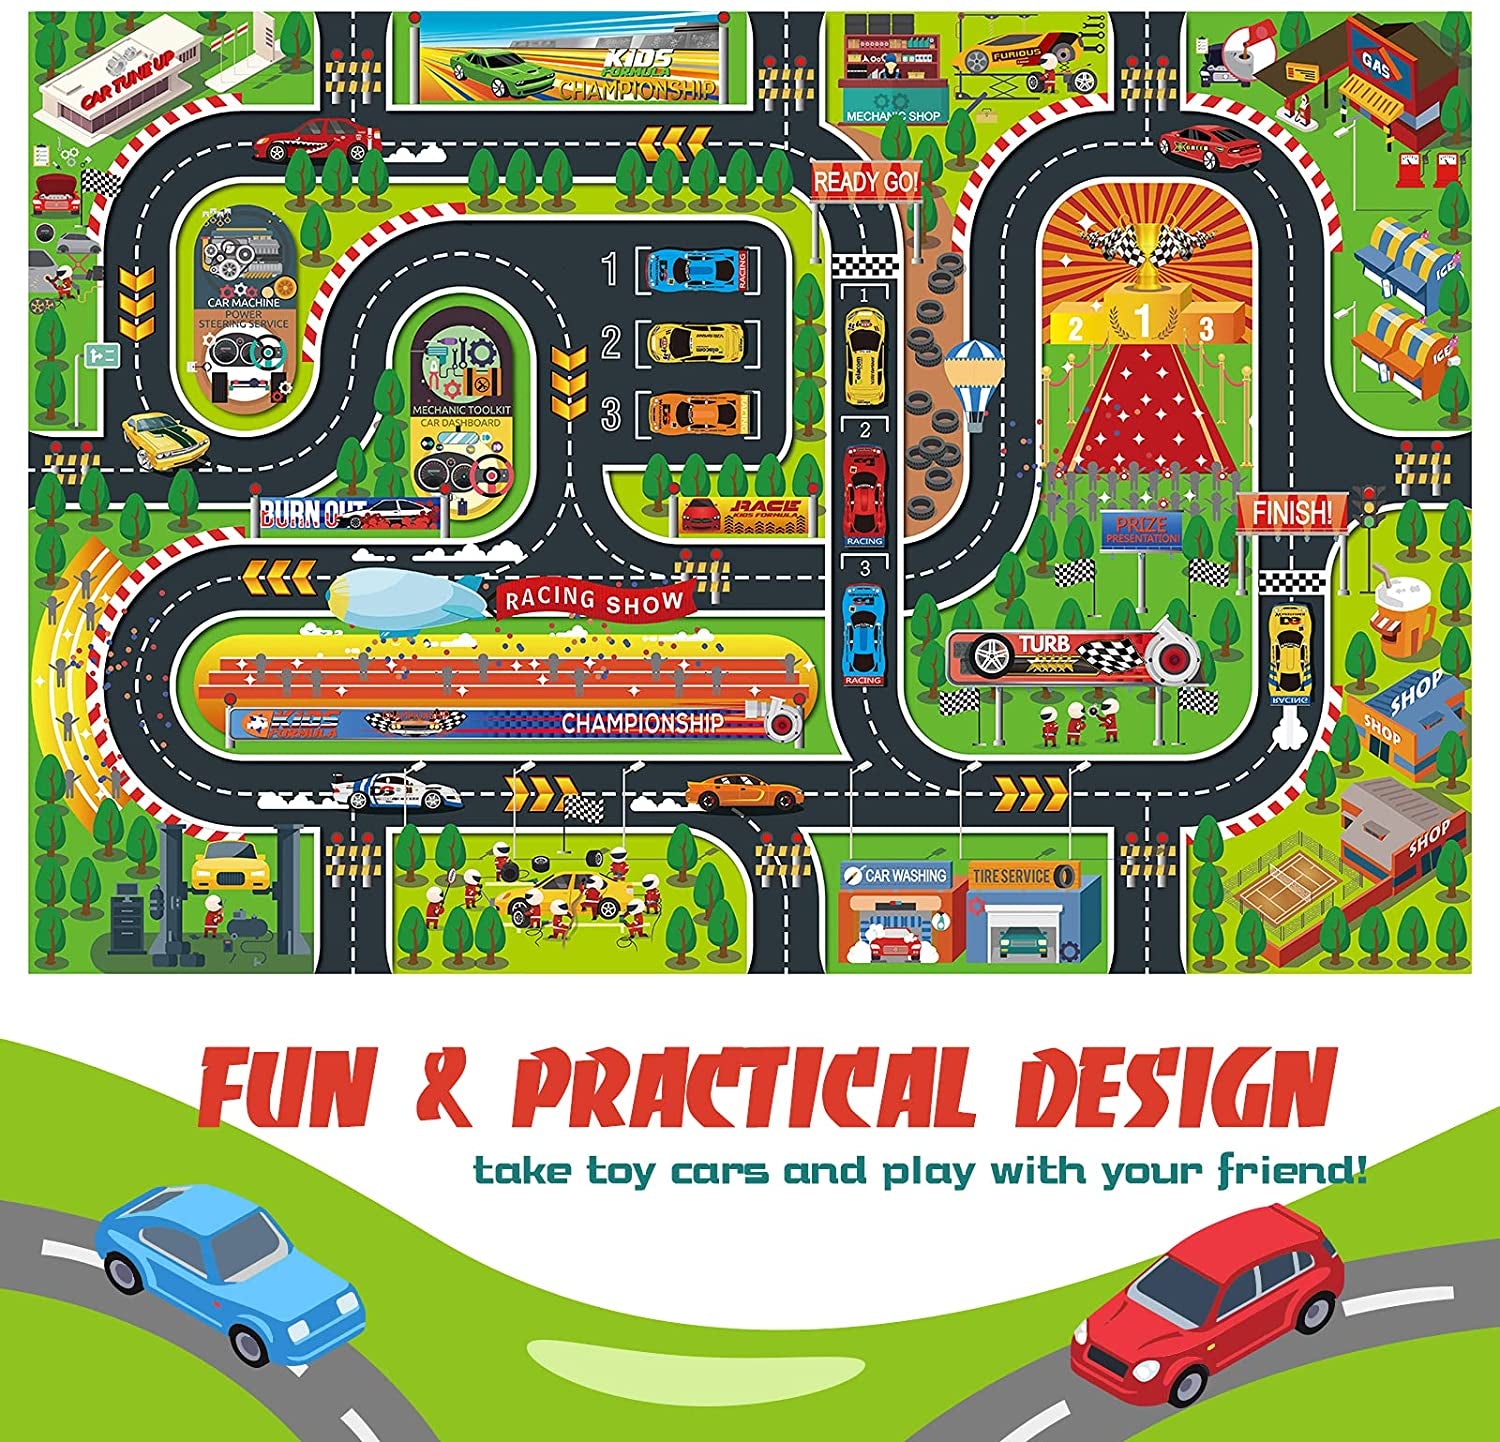 Kids Dream Mat Modern City Toy Activity Playmat, Parent-Child Interaction Game Map Rug, Ideal Children'S Educational Road Traffic City Life Pretend Play 552-C